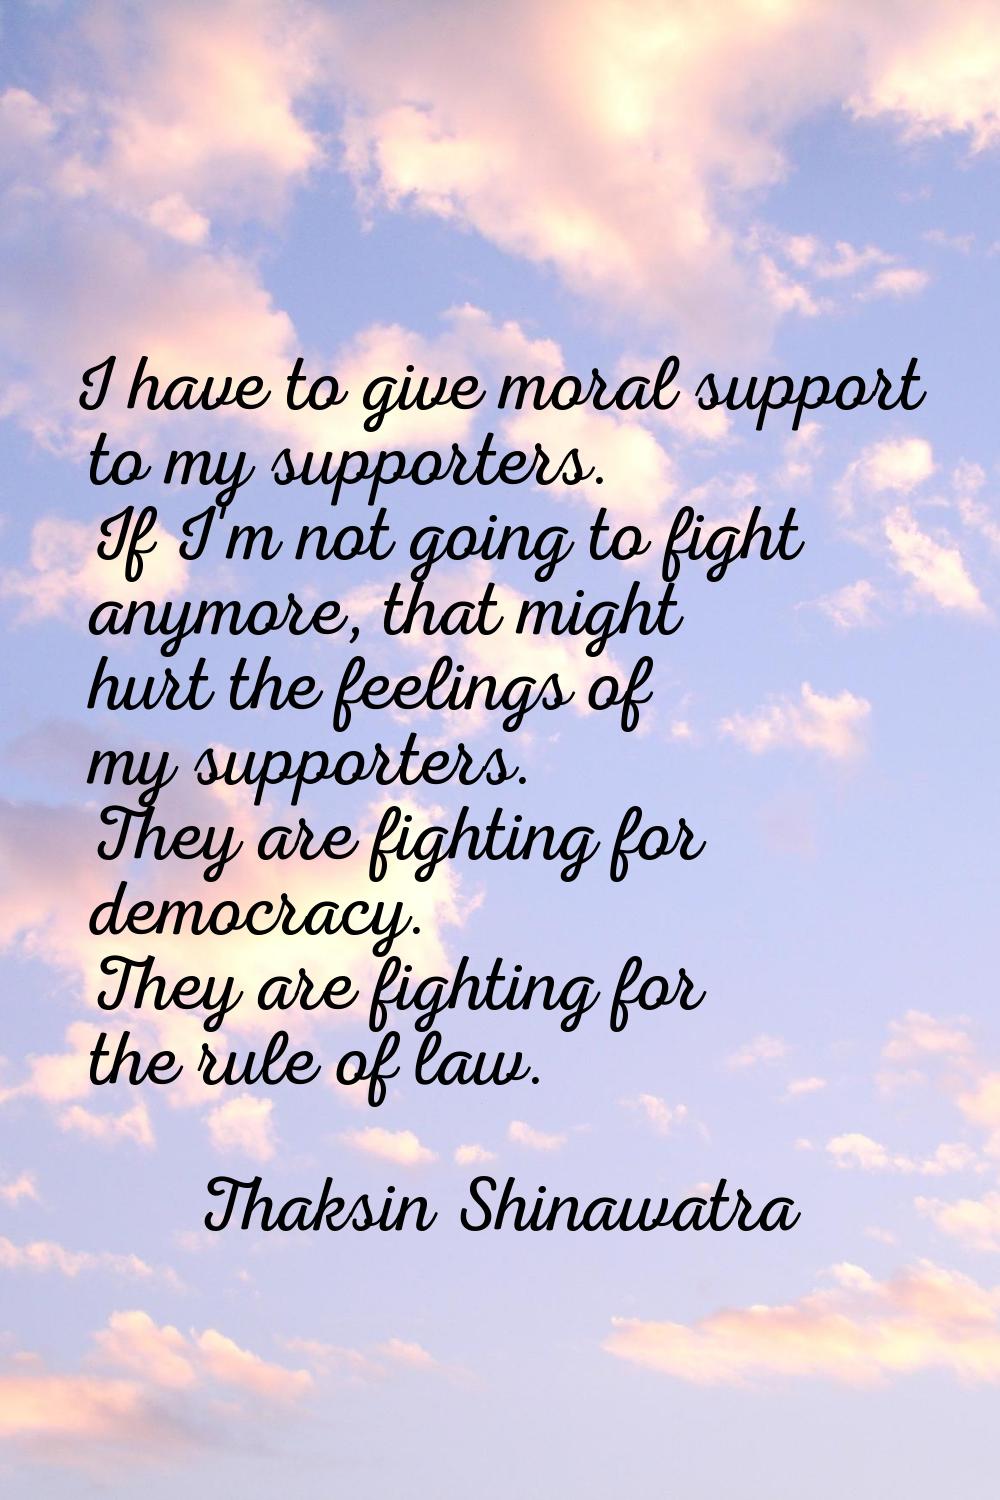 I have to give moral support to my supporters. If I'm not going to fight anymore, that might hurt t